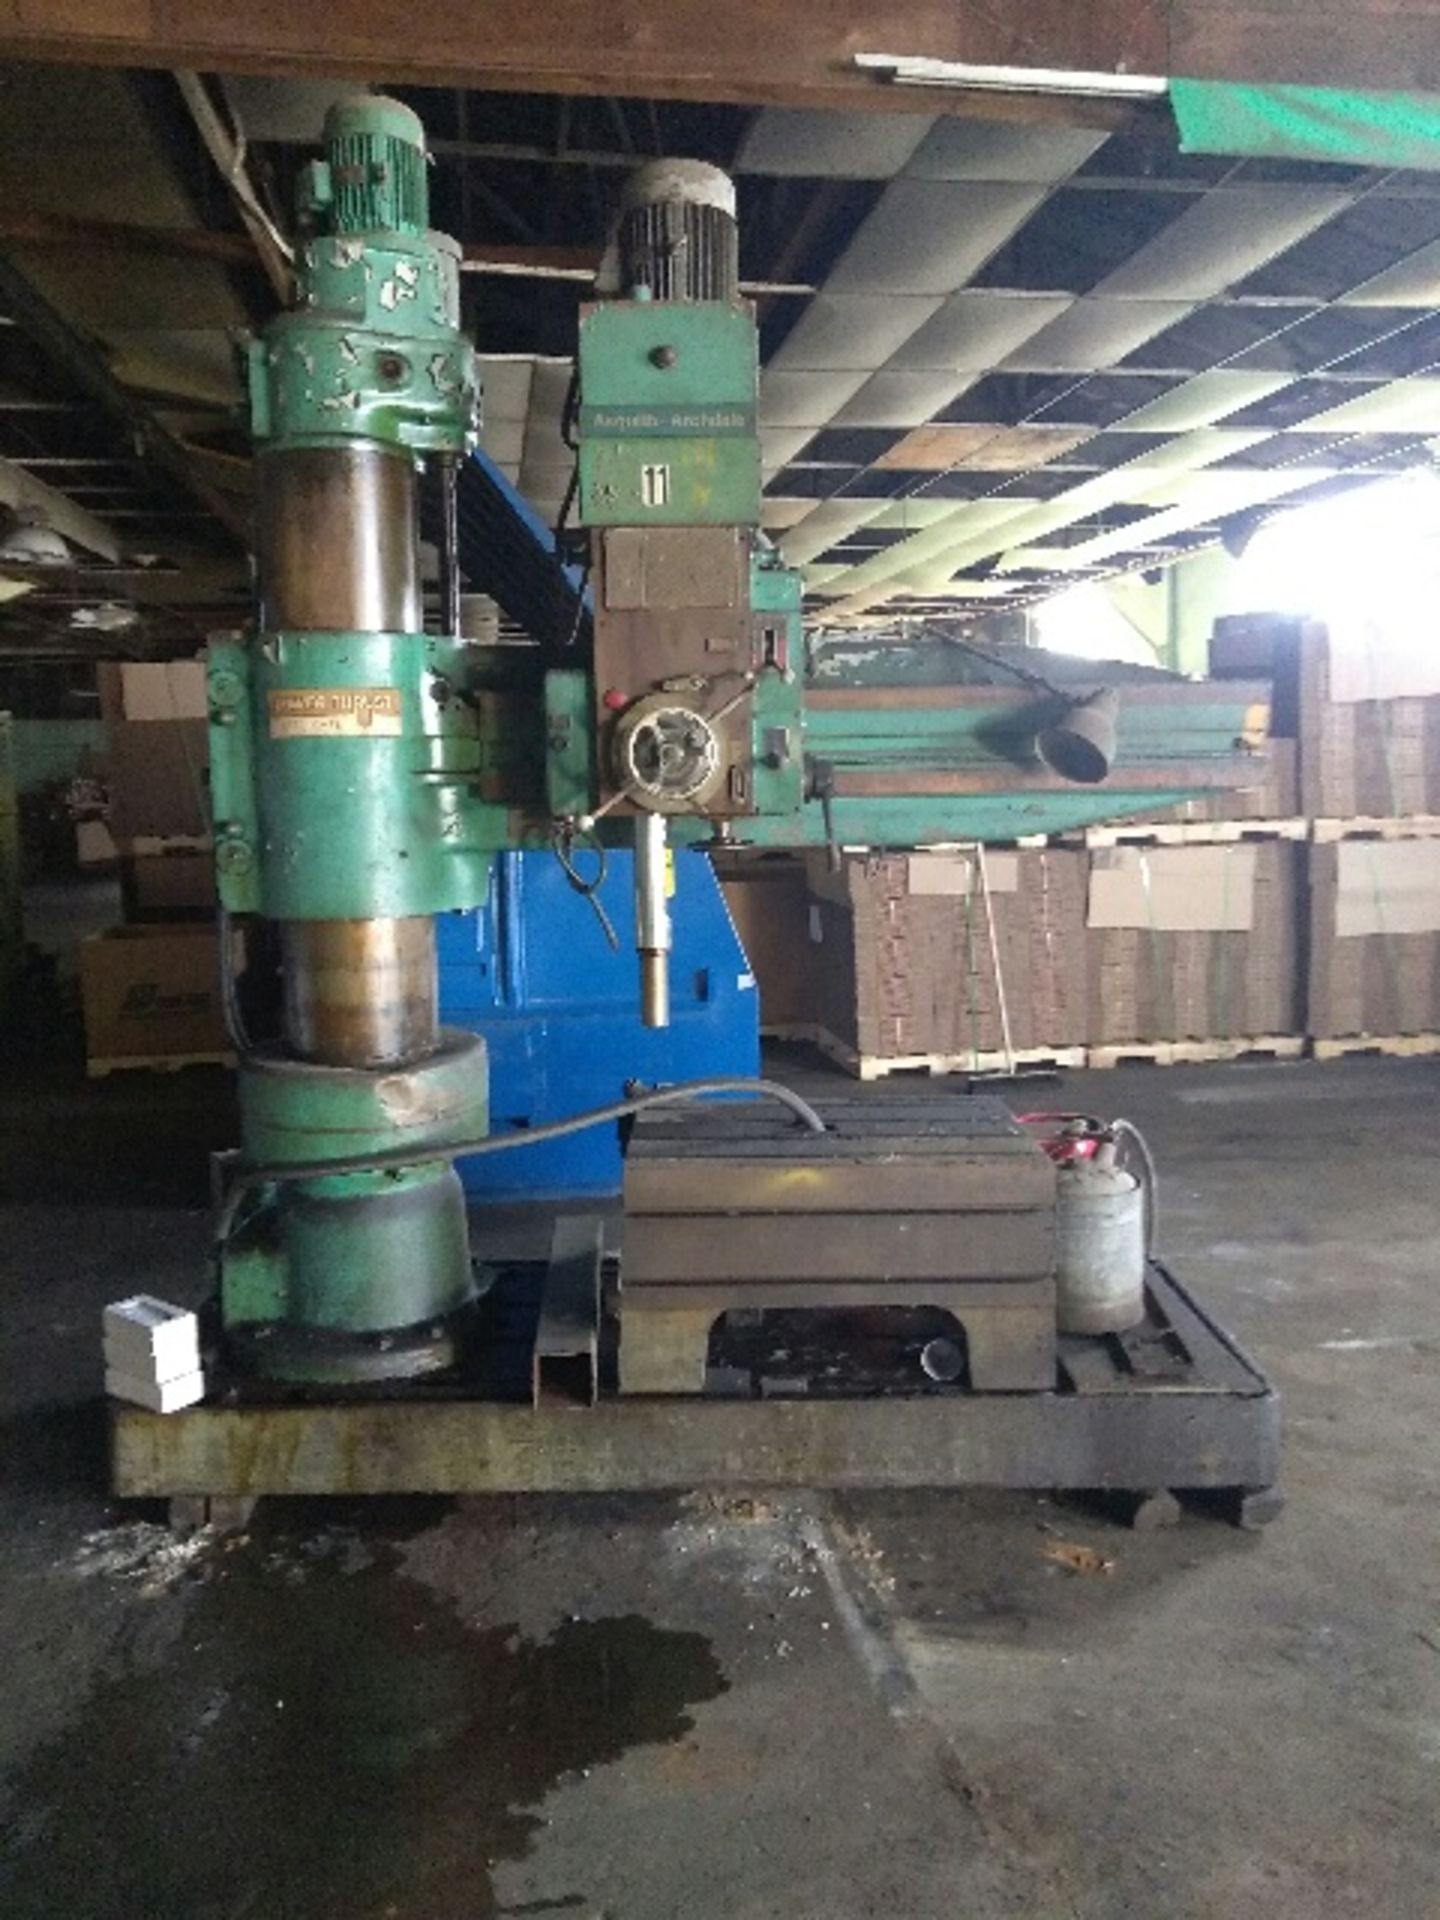 6' 17" Asquith Archdale Radial Drill